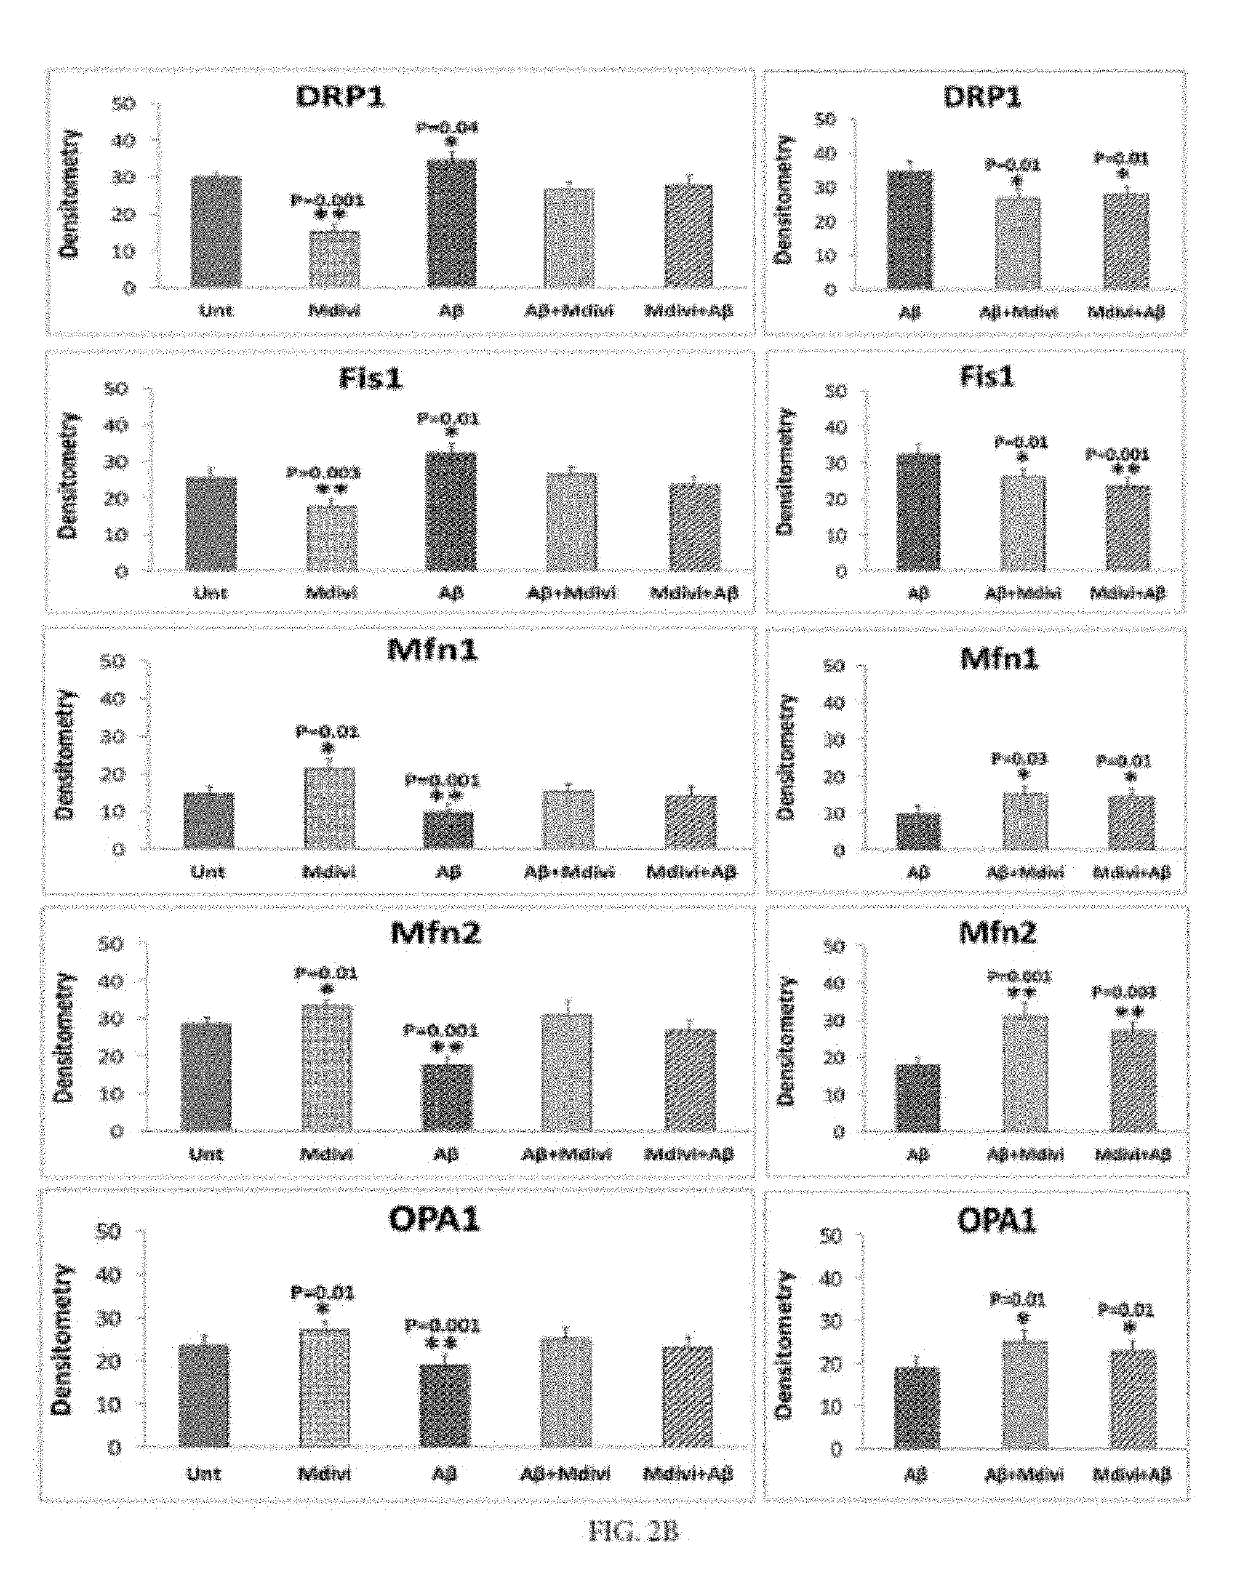 Mitochondria-Division Inhibitor 1 Protects Against Amyloid-B Induced Mitochondrial Fragmentation and Synaptic Damage in Alzheimer's Disease